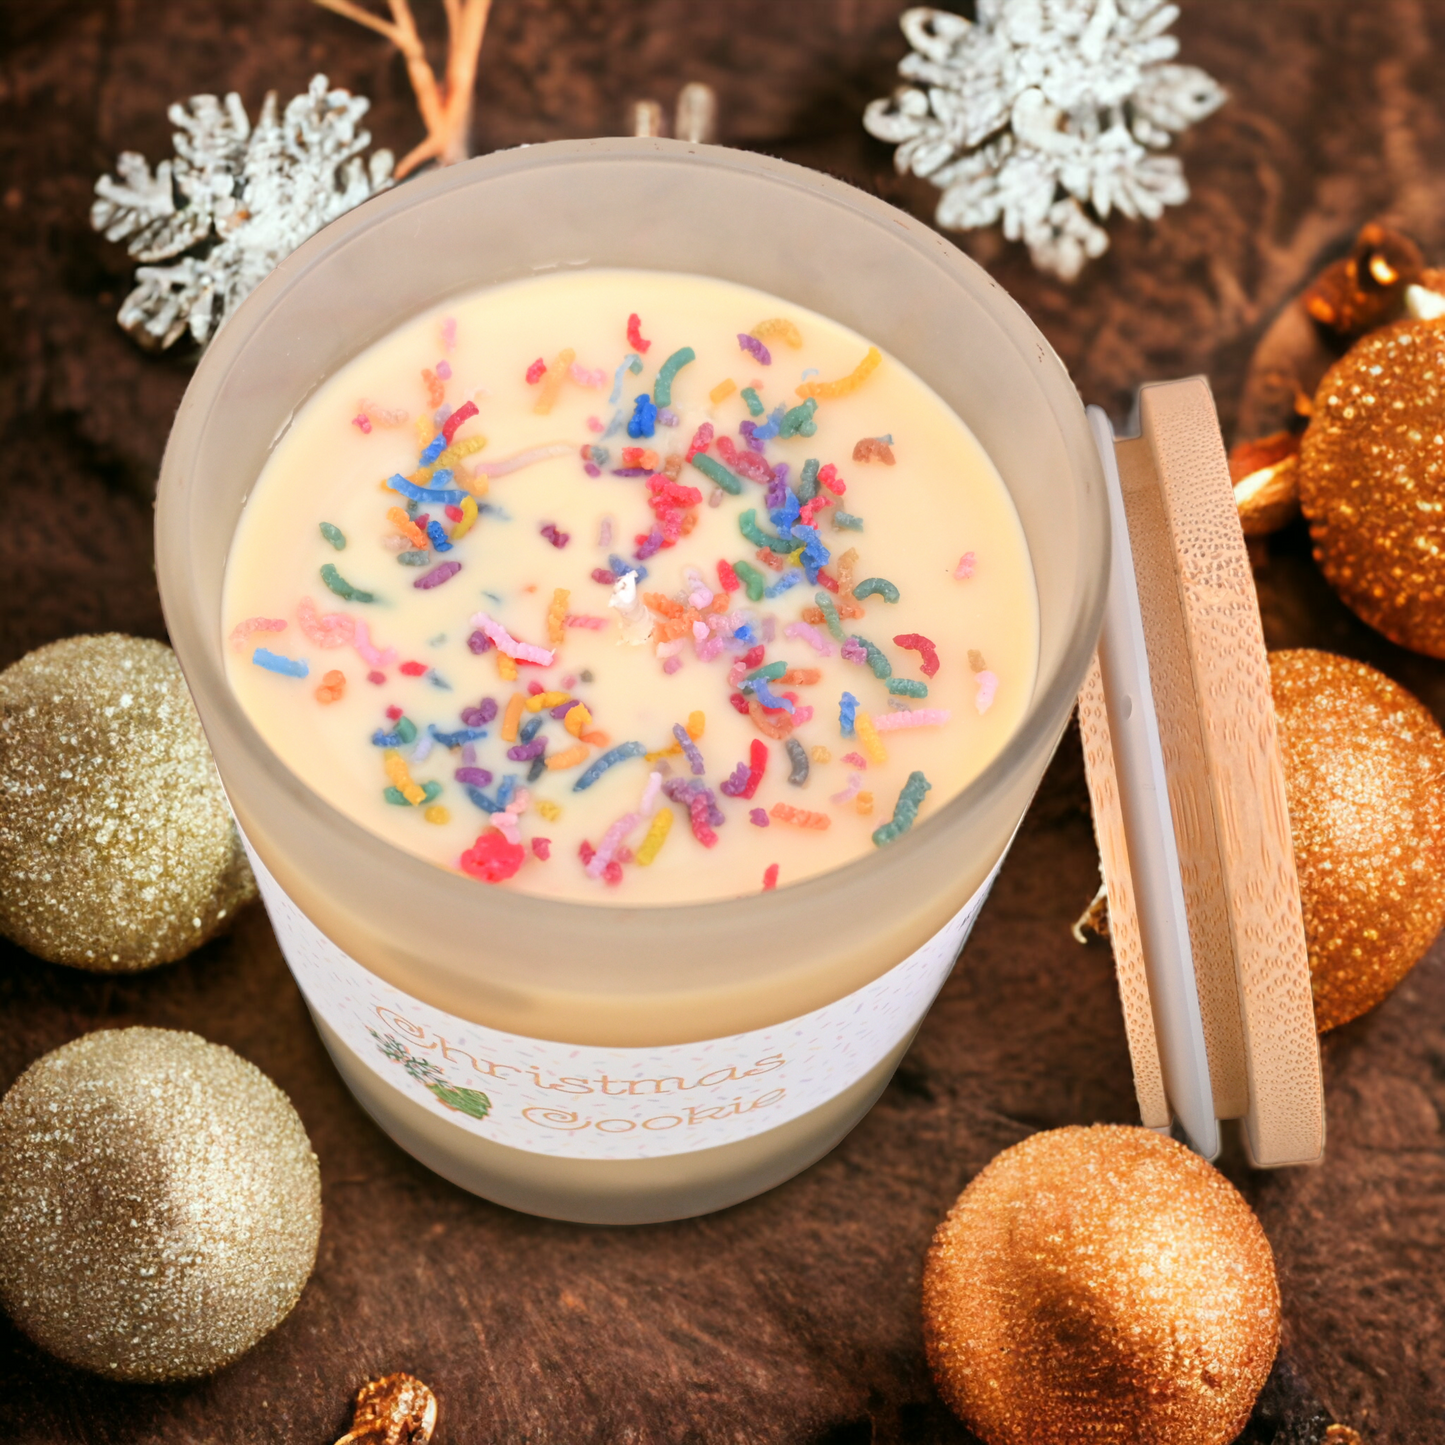 Christmas Cookie Candle - Cookie Candle